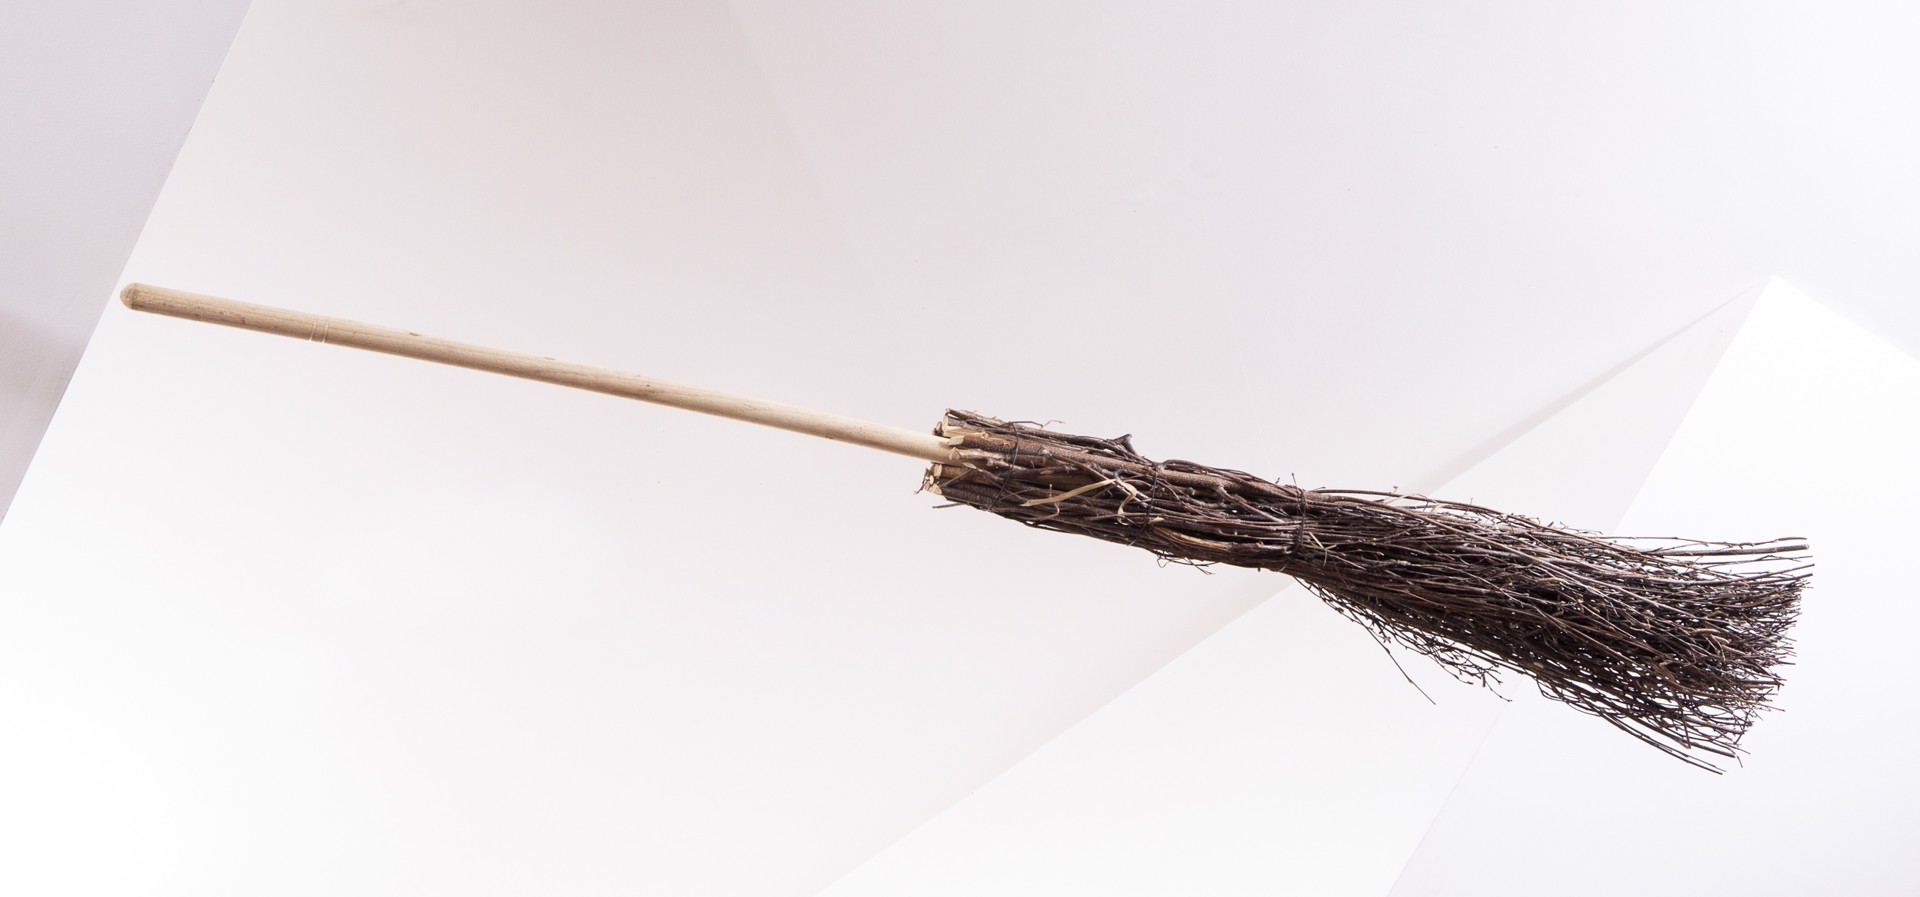 Charged Witches Broom To Sweep Out Patriarchy, Colonialism & Repression by Stewart Home